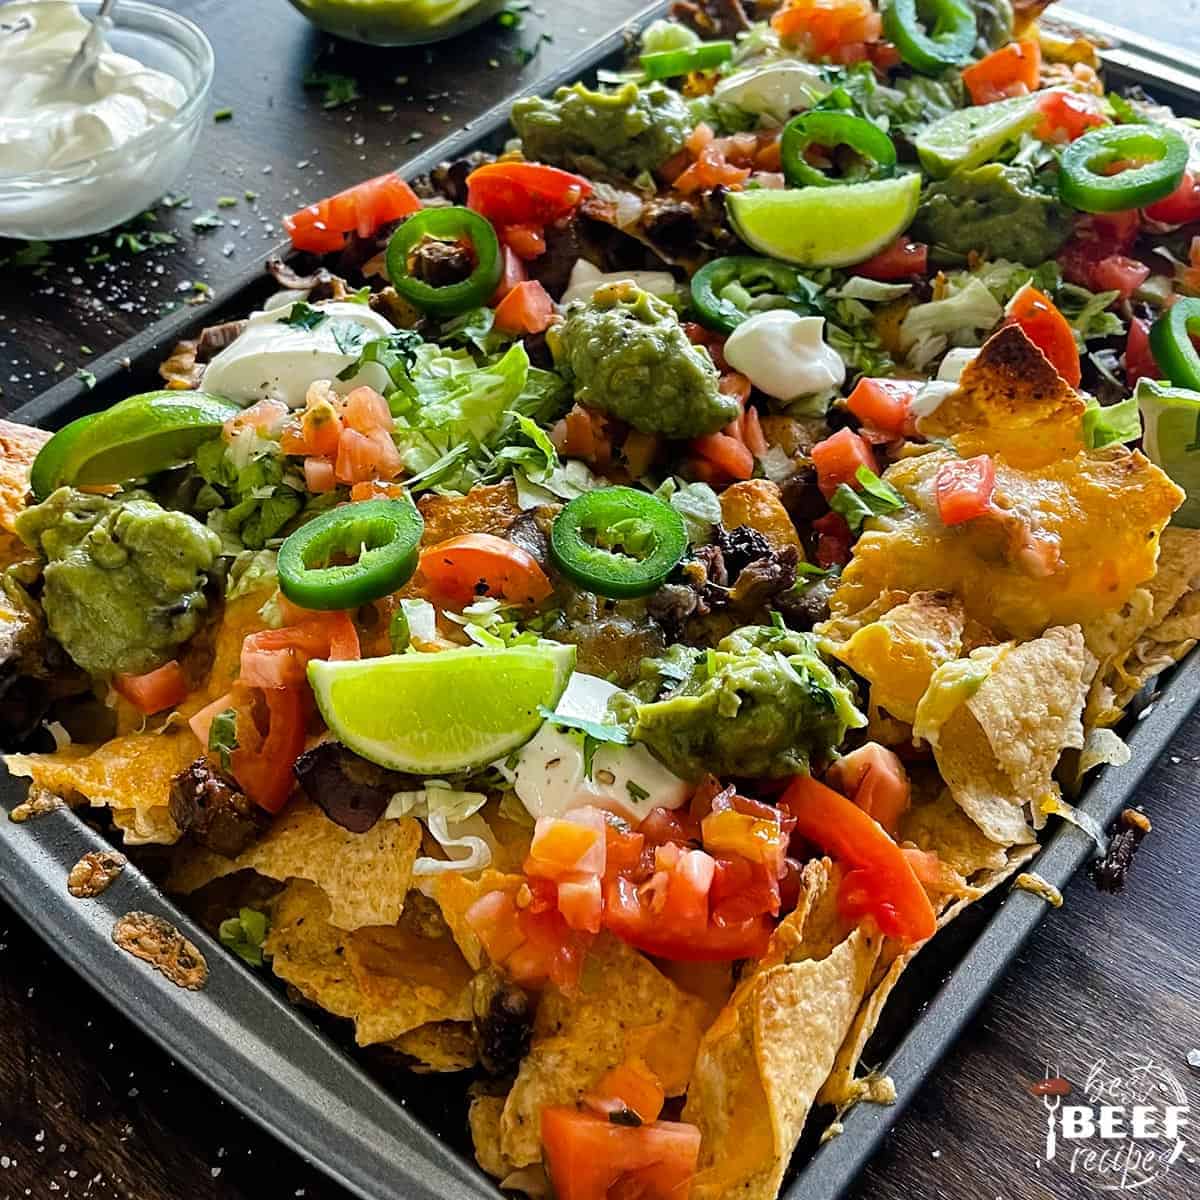 steak nachos on a tray with limes and guacamole